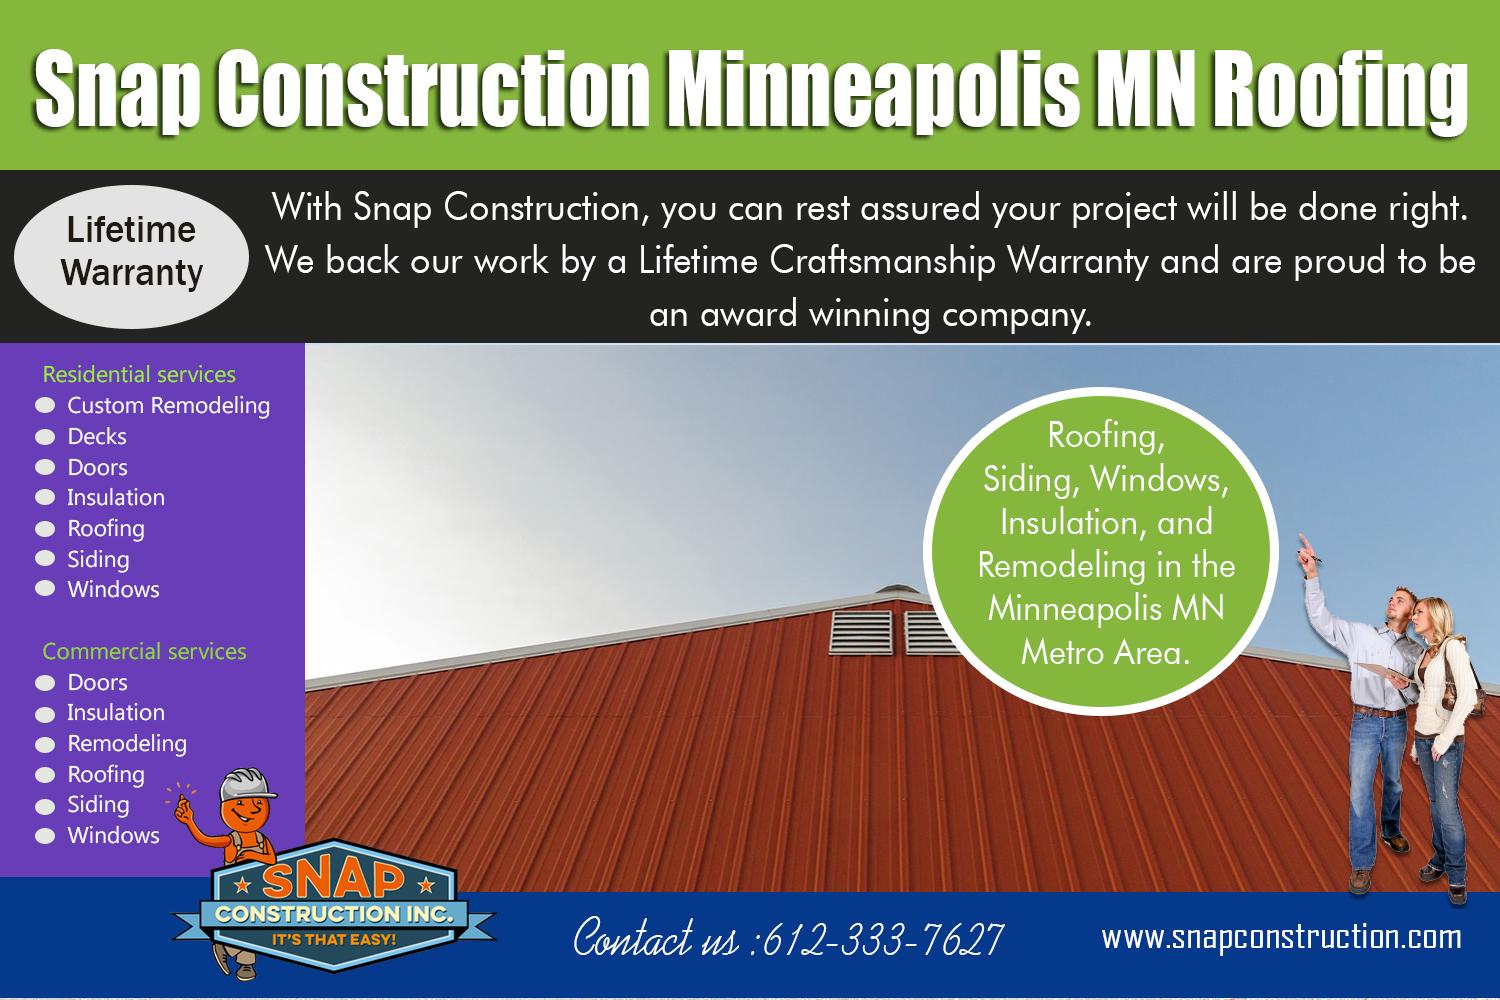 Snap Construction Minneapolis MN roofing